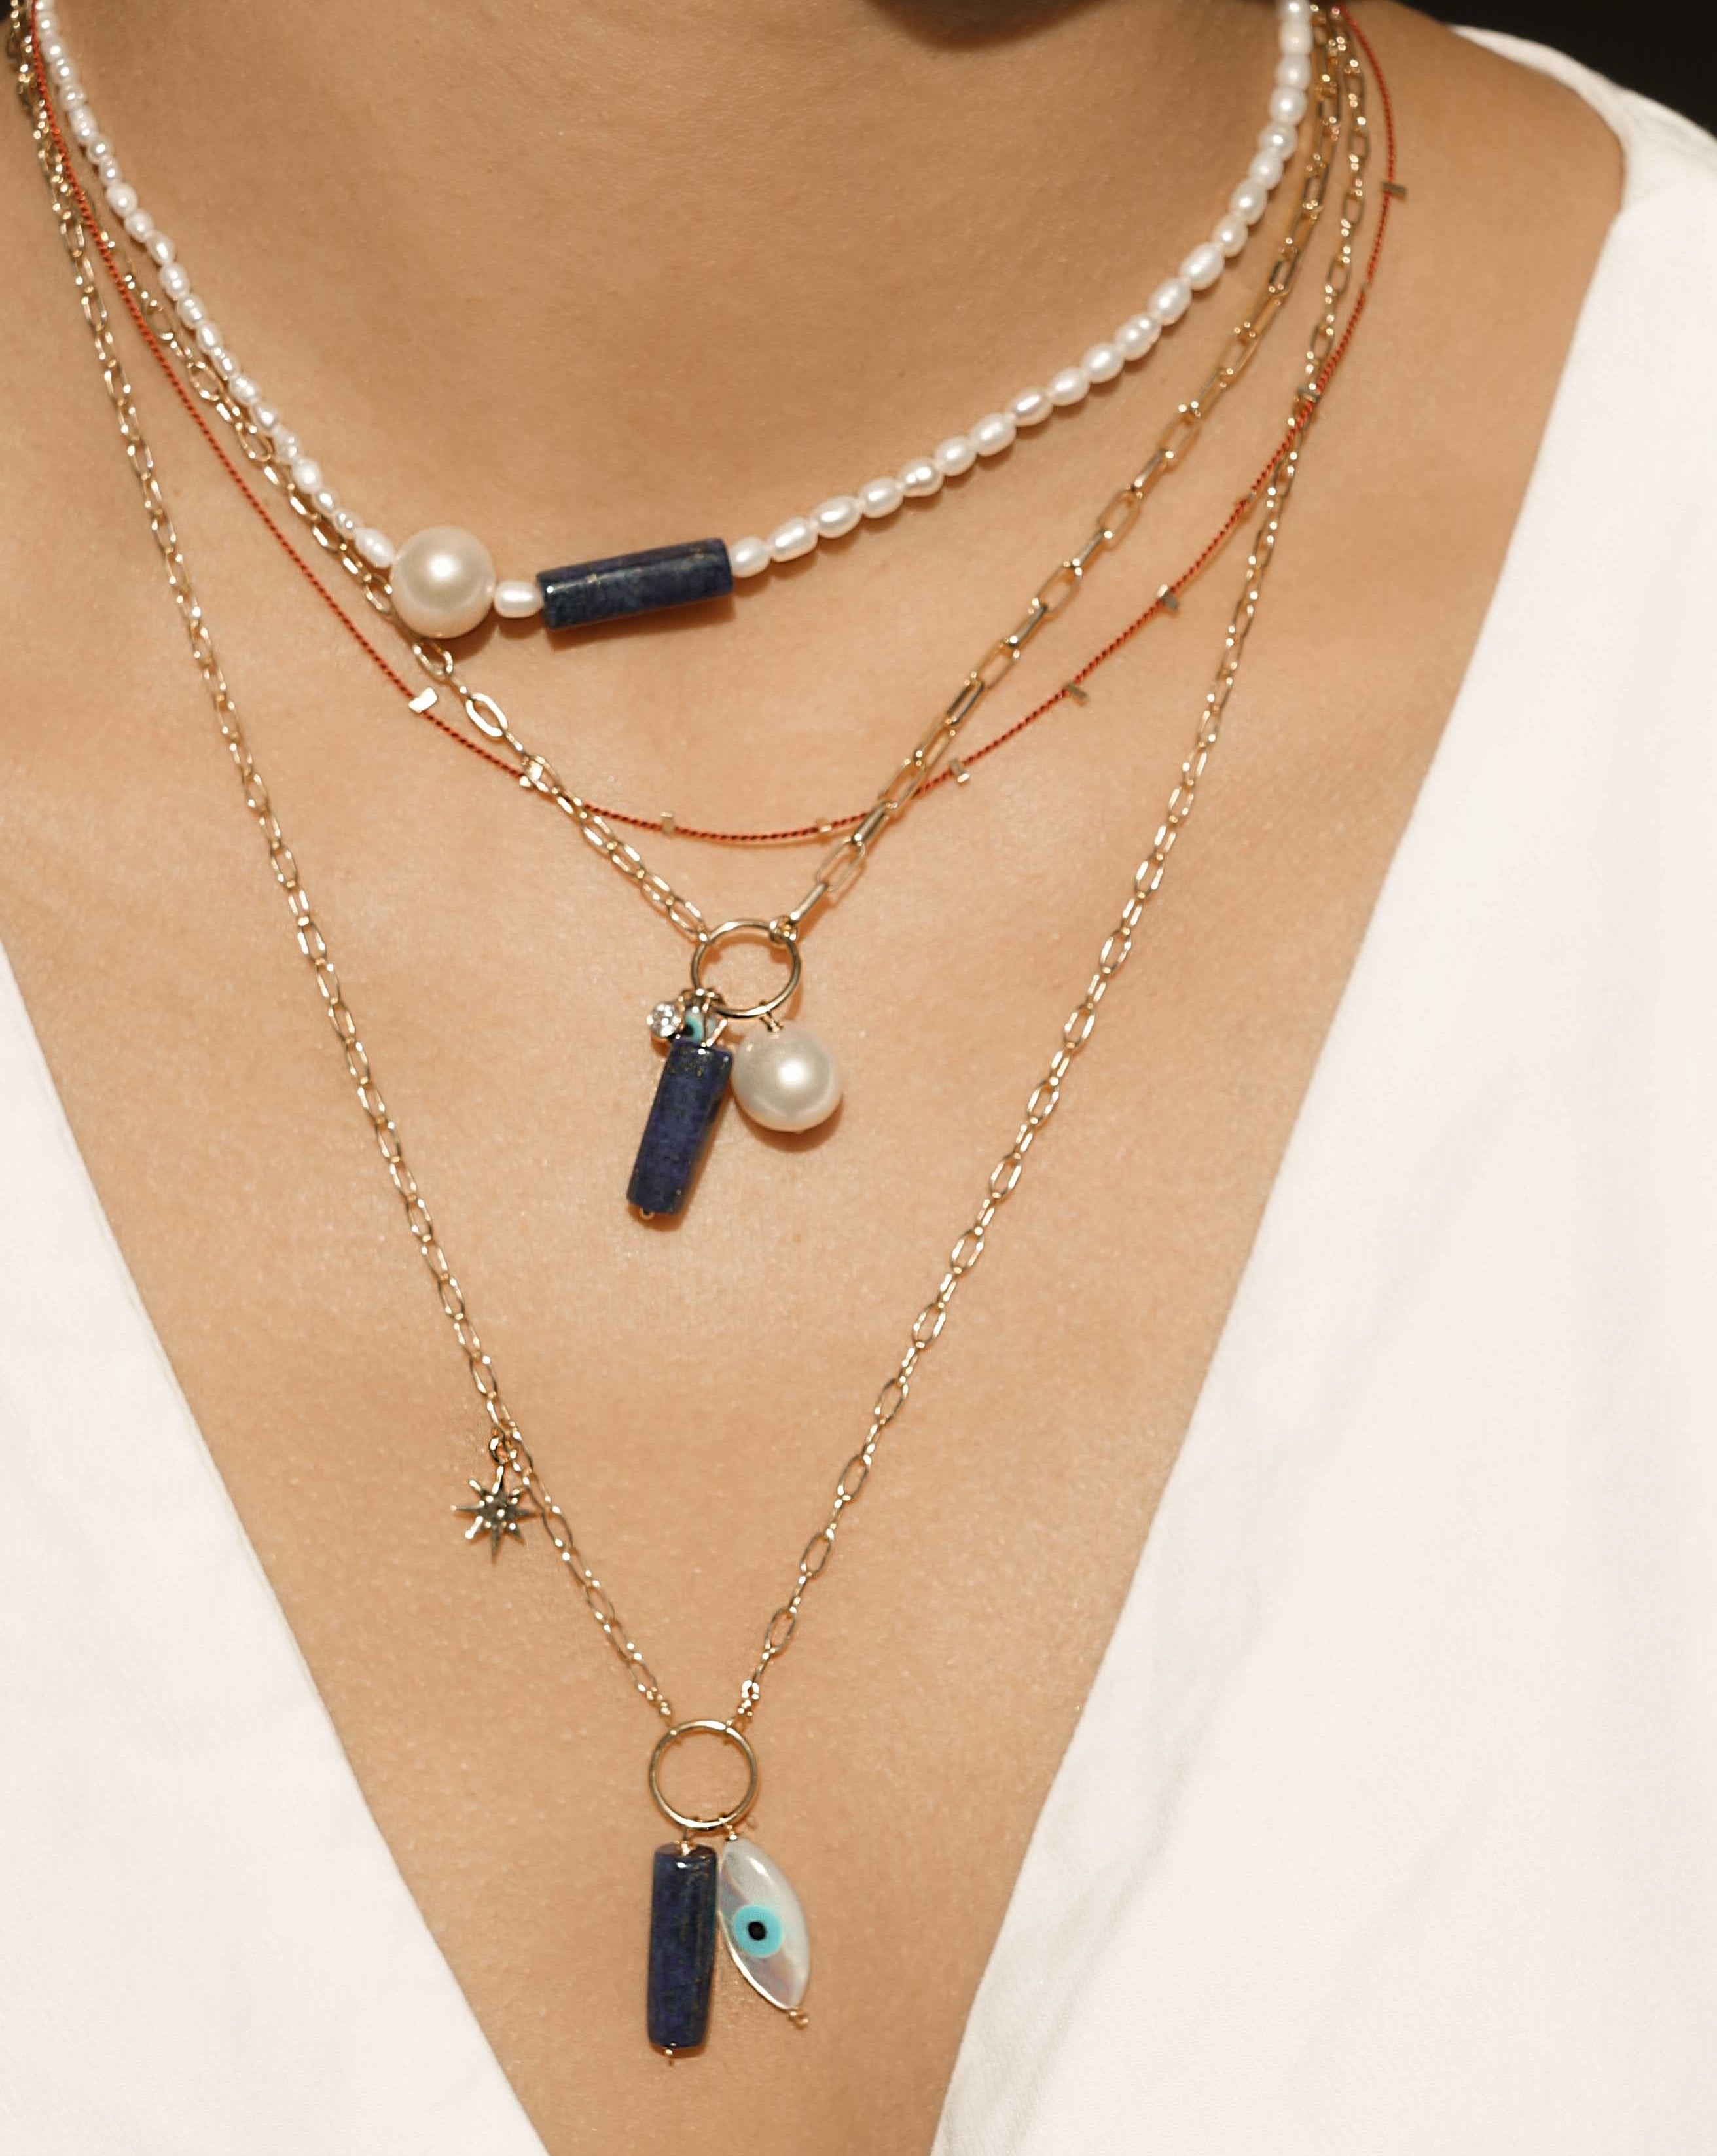 Eye Chakra Necklace by KOZAKH. A 14K Gold Filled necklace with adjustable length from 20 inches, featuring a hand carved Mother of Pearl Evil Eye, a cylindrical cut Lapis, and a Cubic Zirconia encrusted star charm.